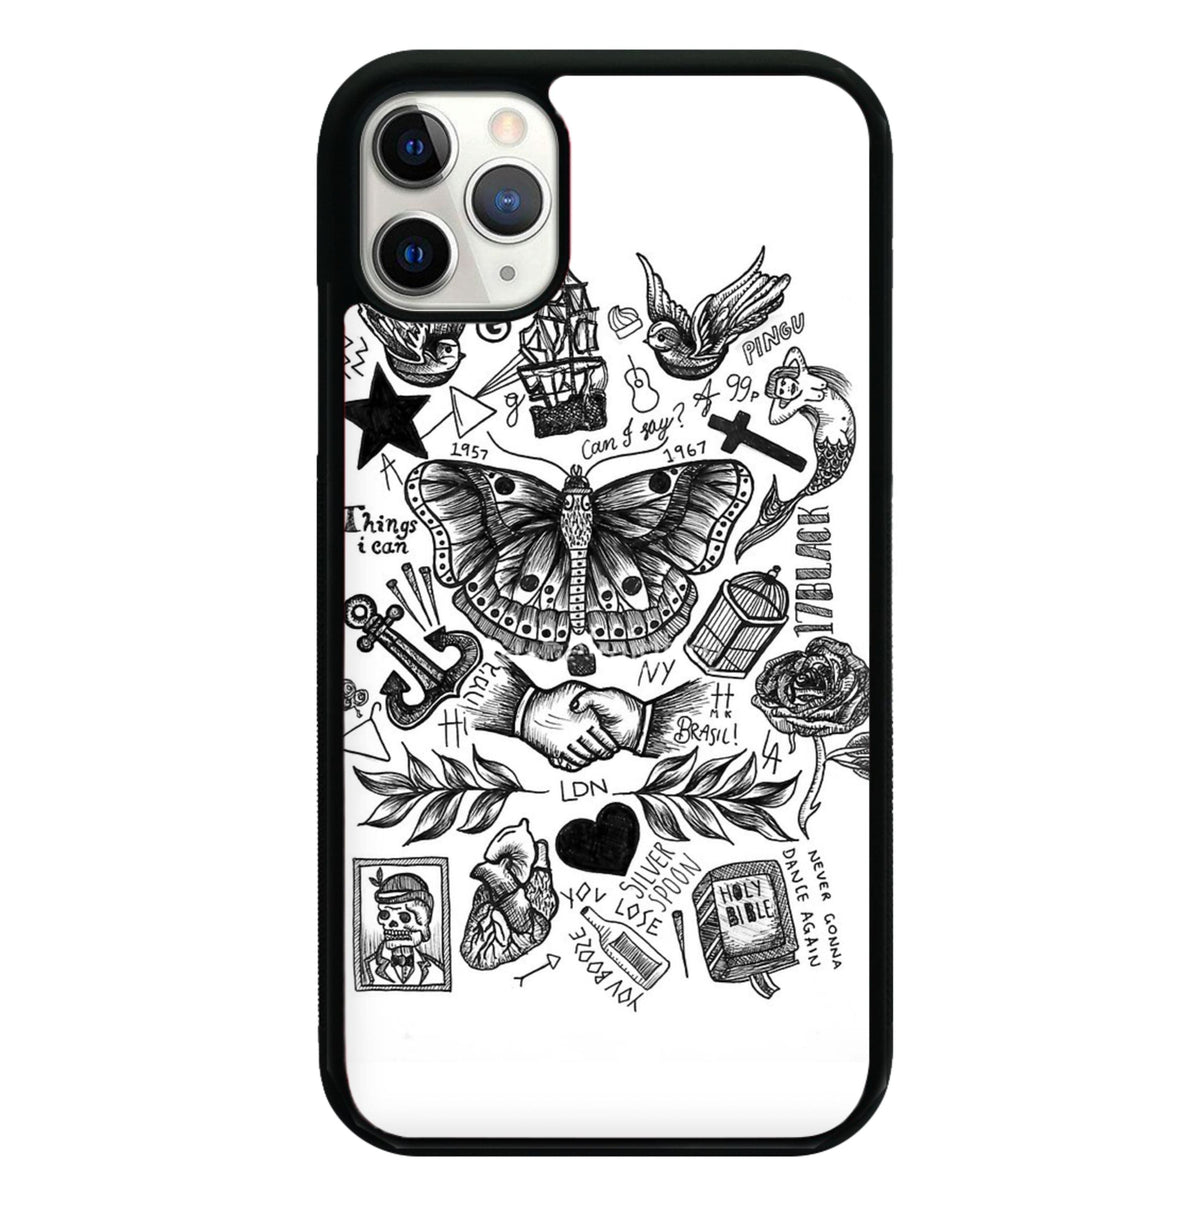 Harry Style's Tattoos Phone Case - Fun Cases